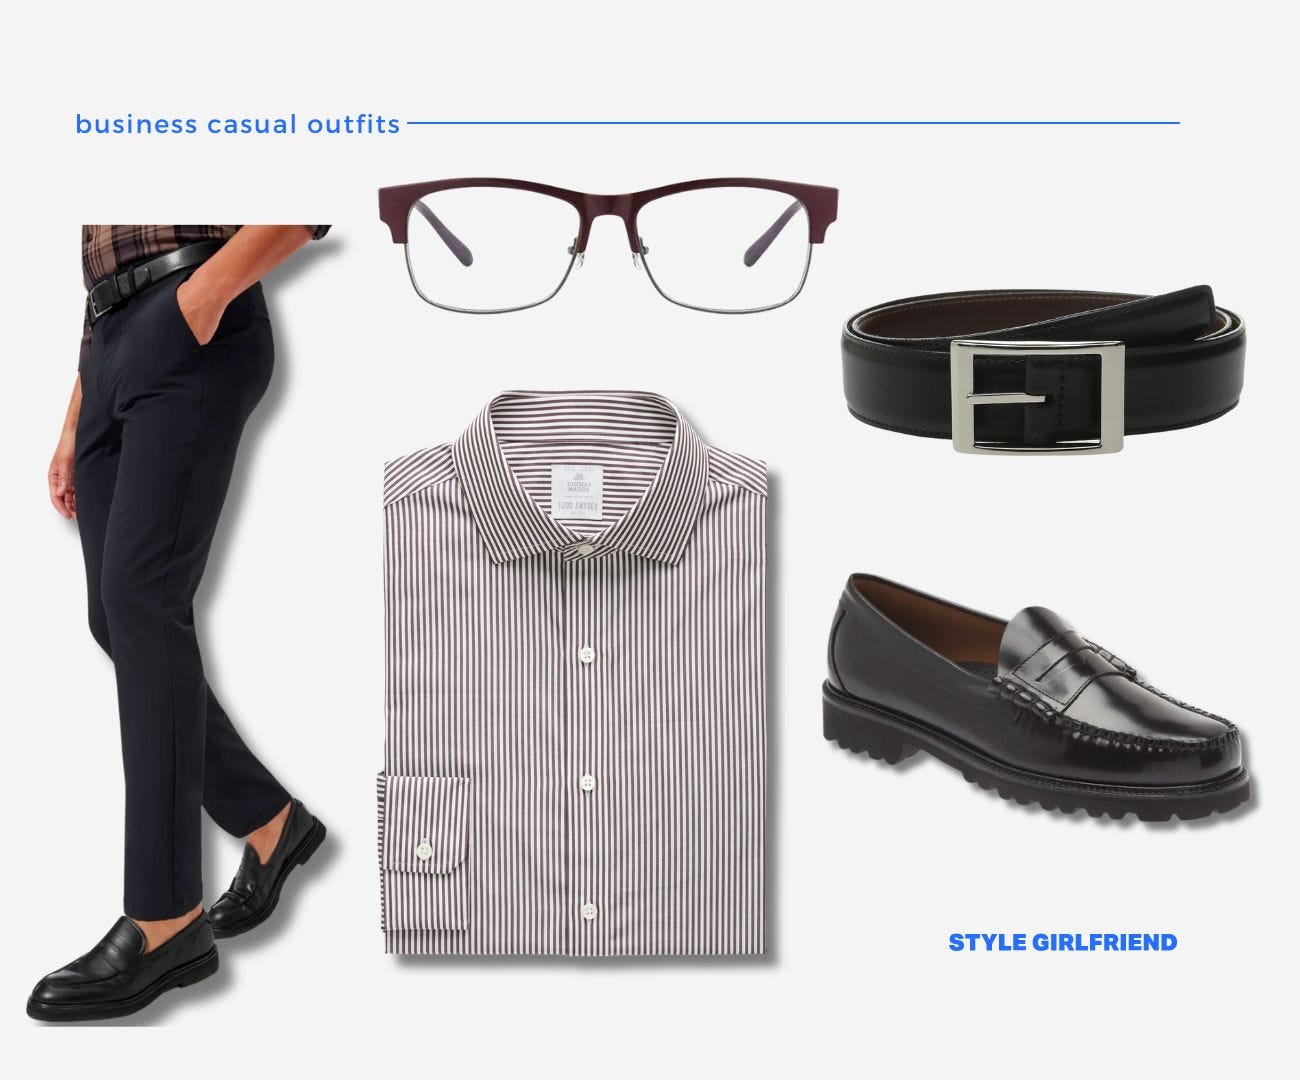 Smart Casual Men's Dress Code Guide | Man of Many